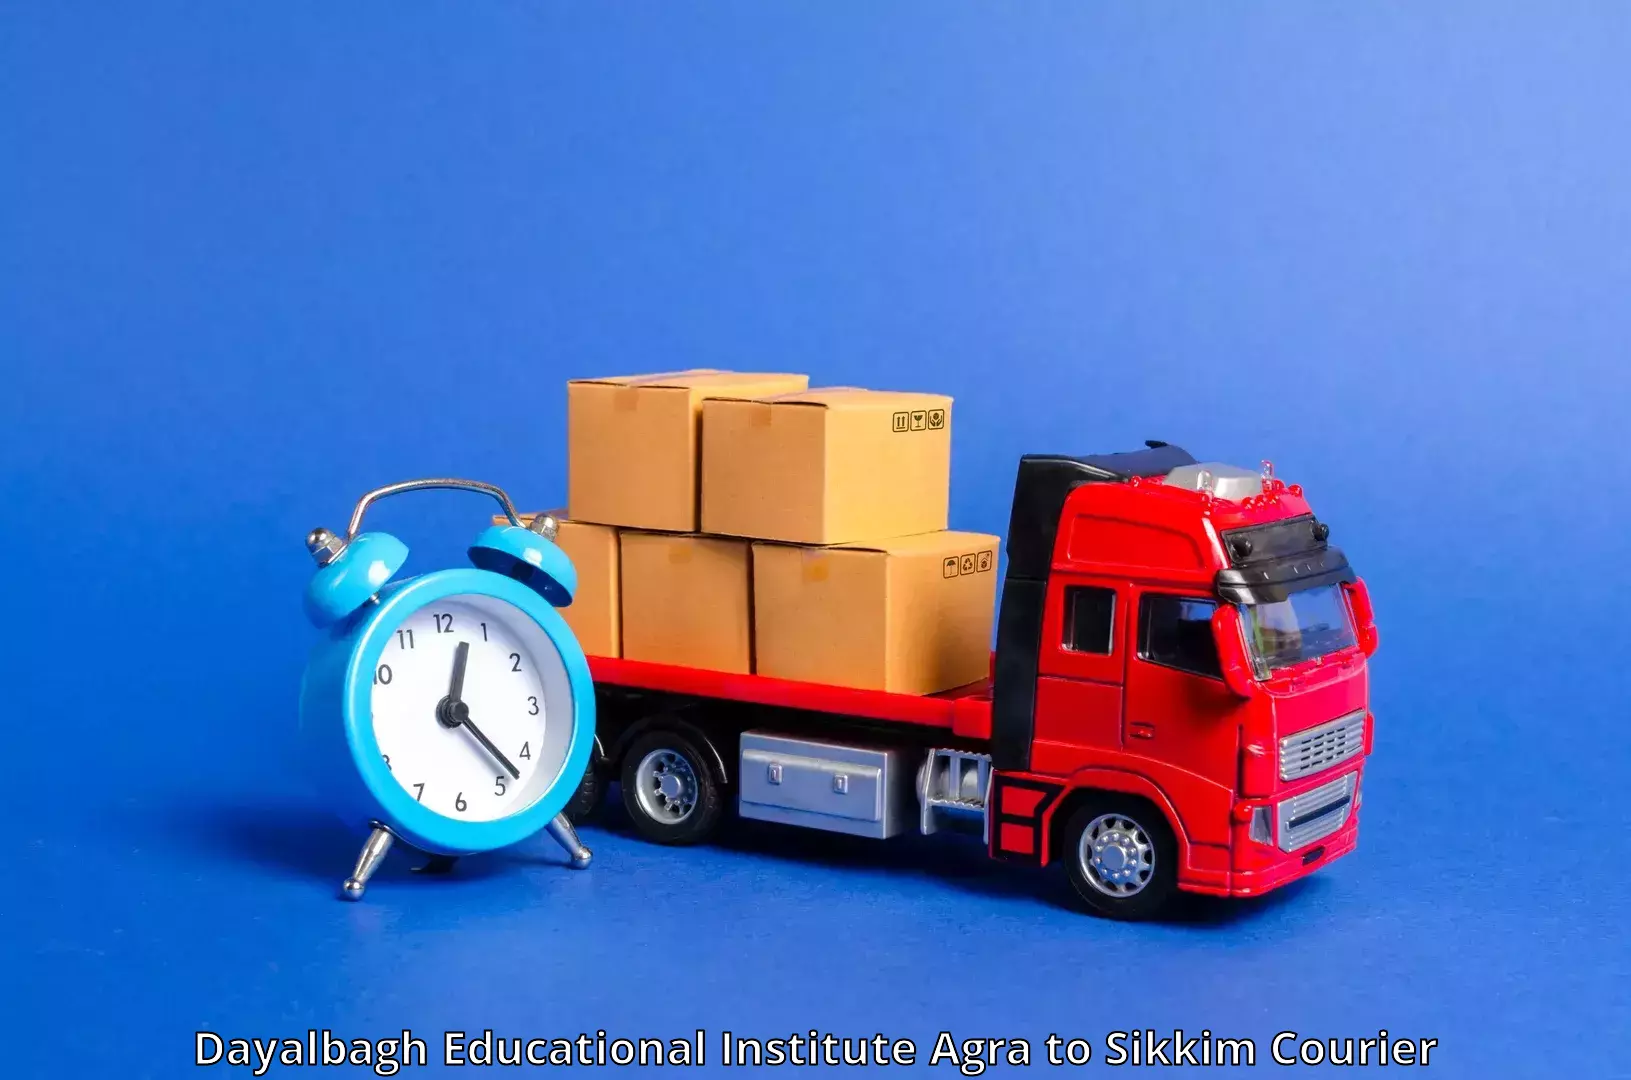 Affordable parcel service Dayalbagh Educational Institute Agra to NIT Sikkim